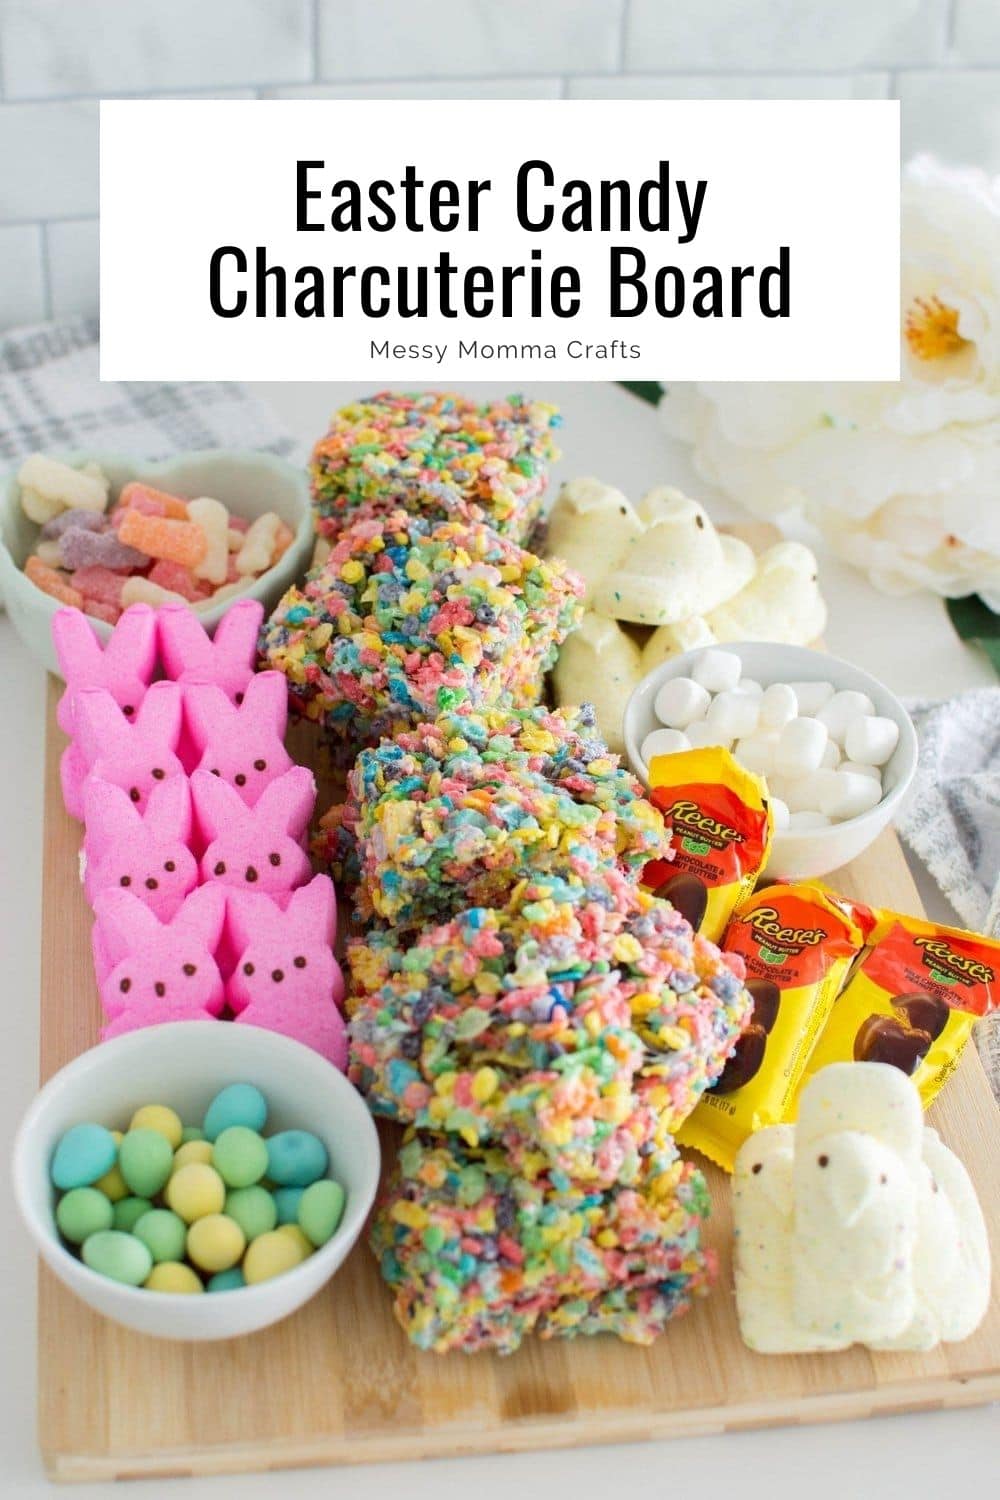 Easter candy charcuterie board.